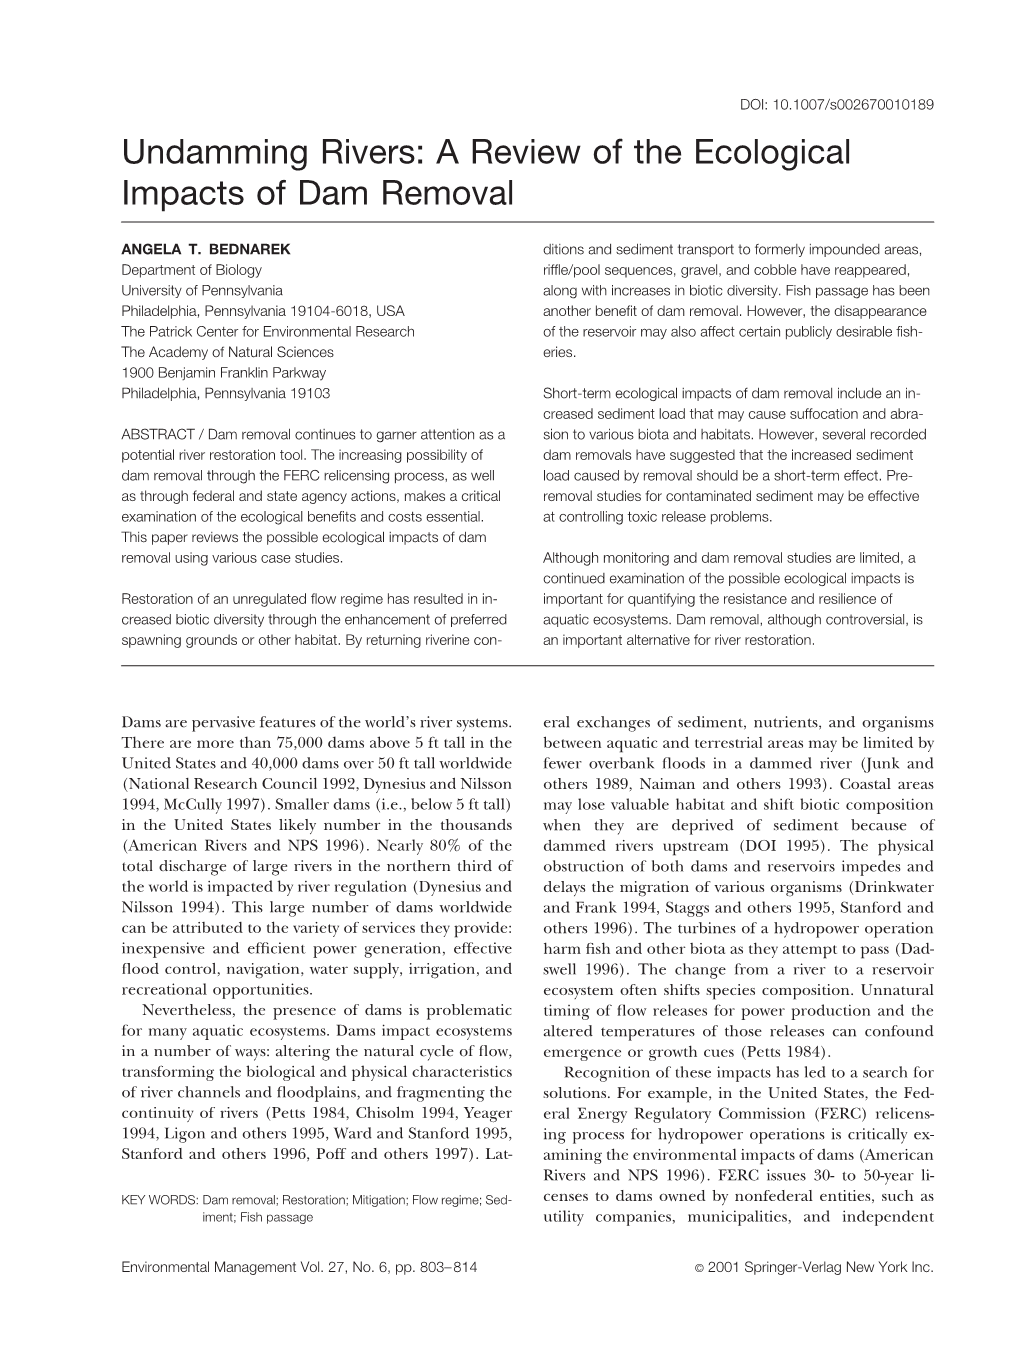 Undamming Rivers: a Review of the Ecological Impacts of Dam Removal